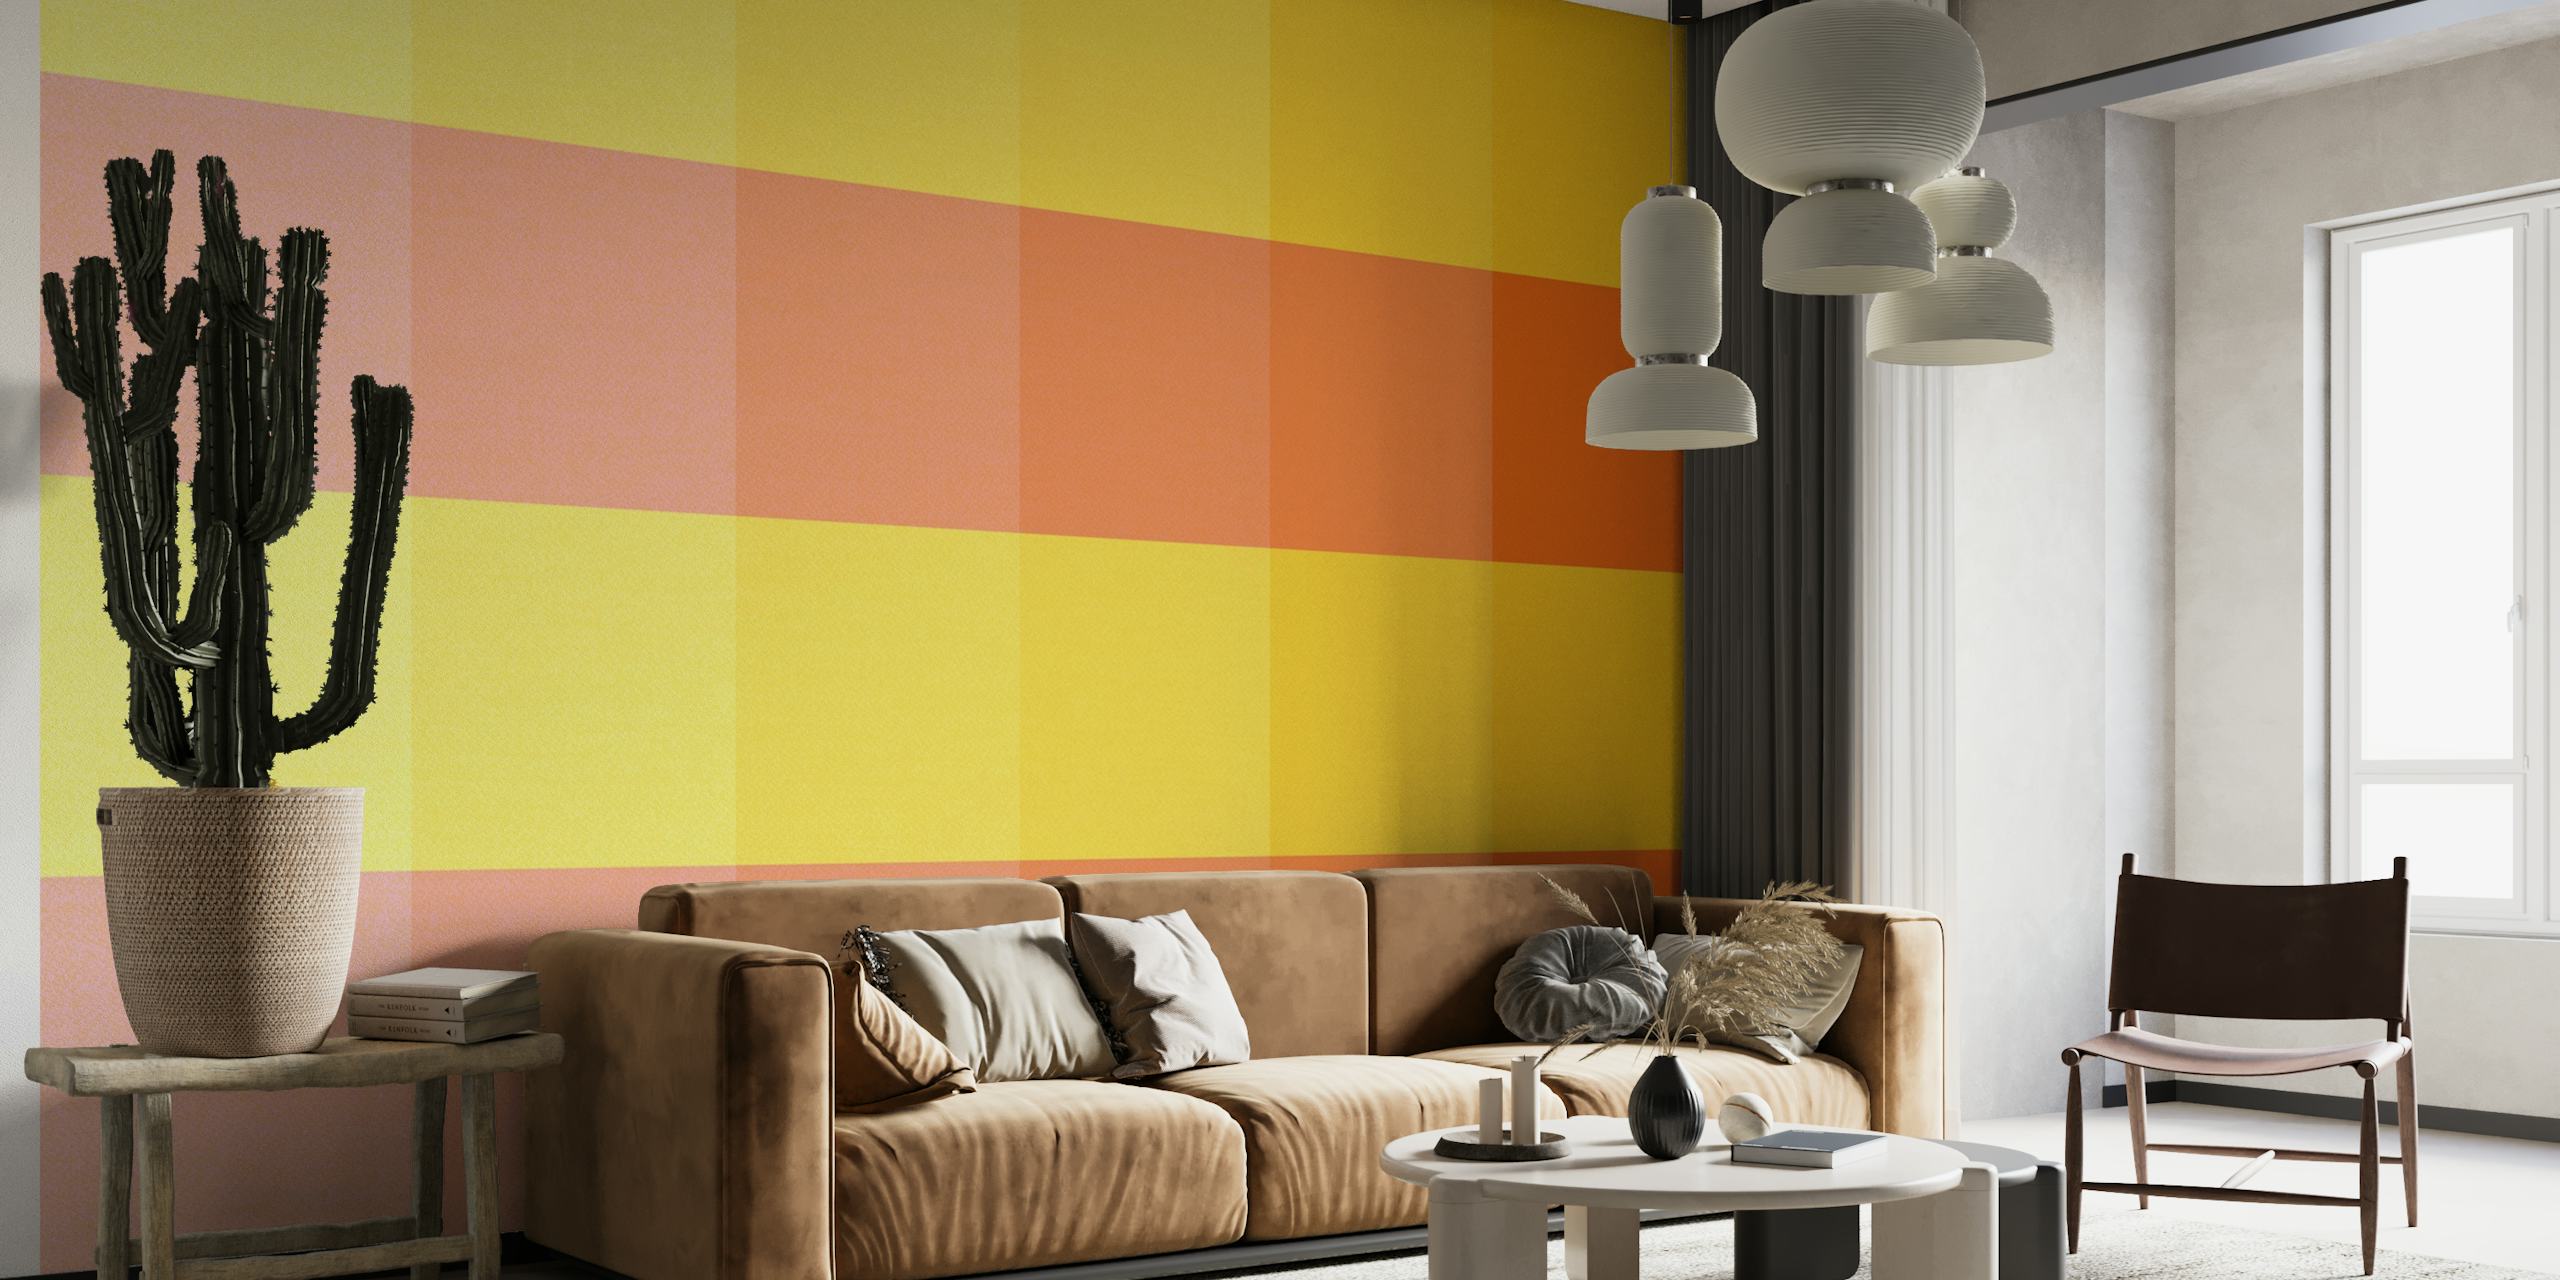 Warm-toned checkerboard pattern wall mural